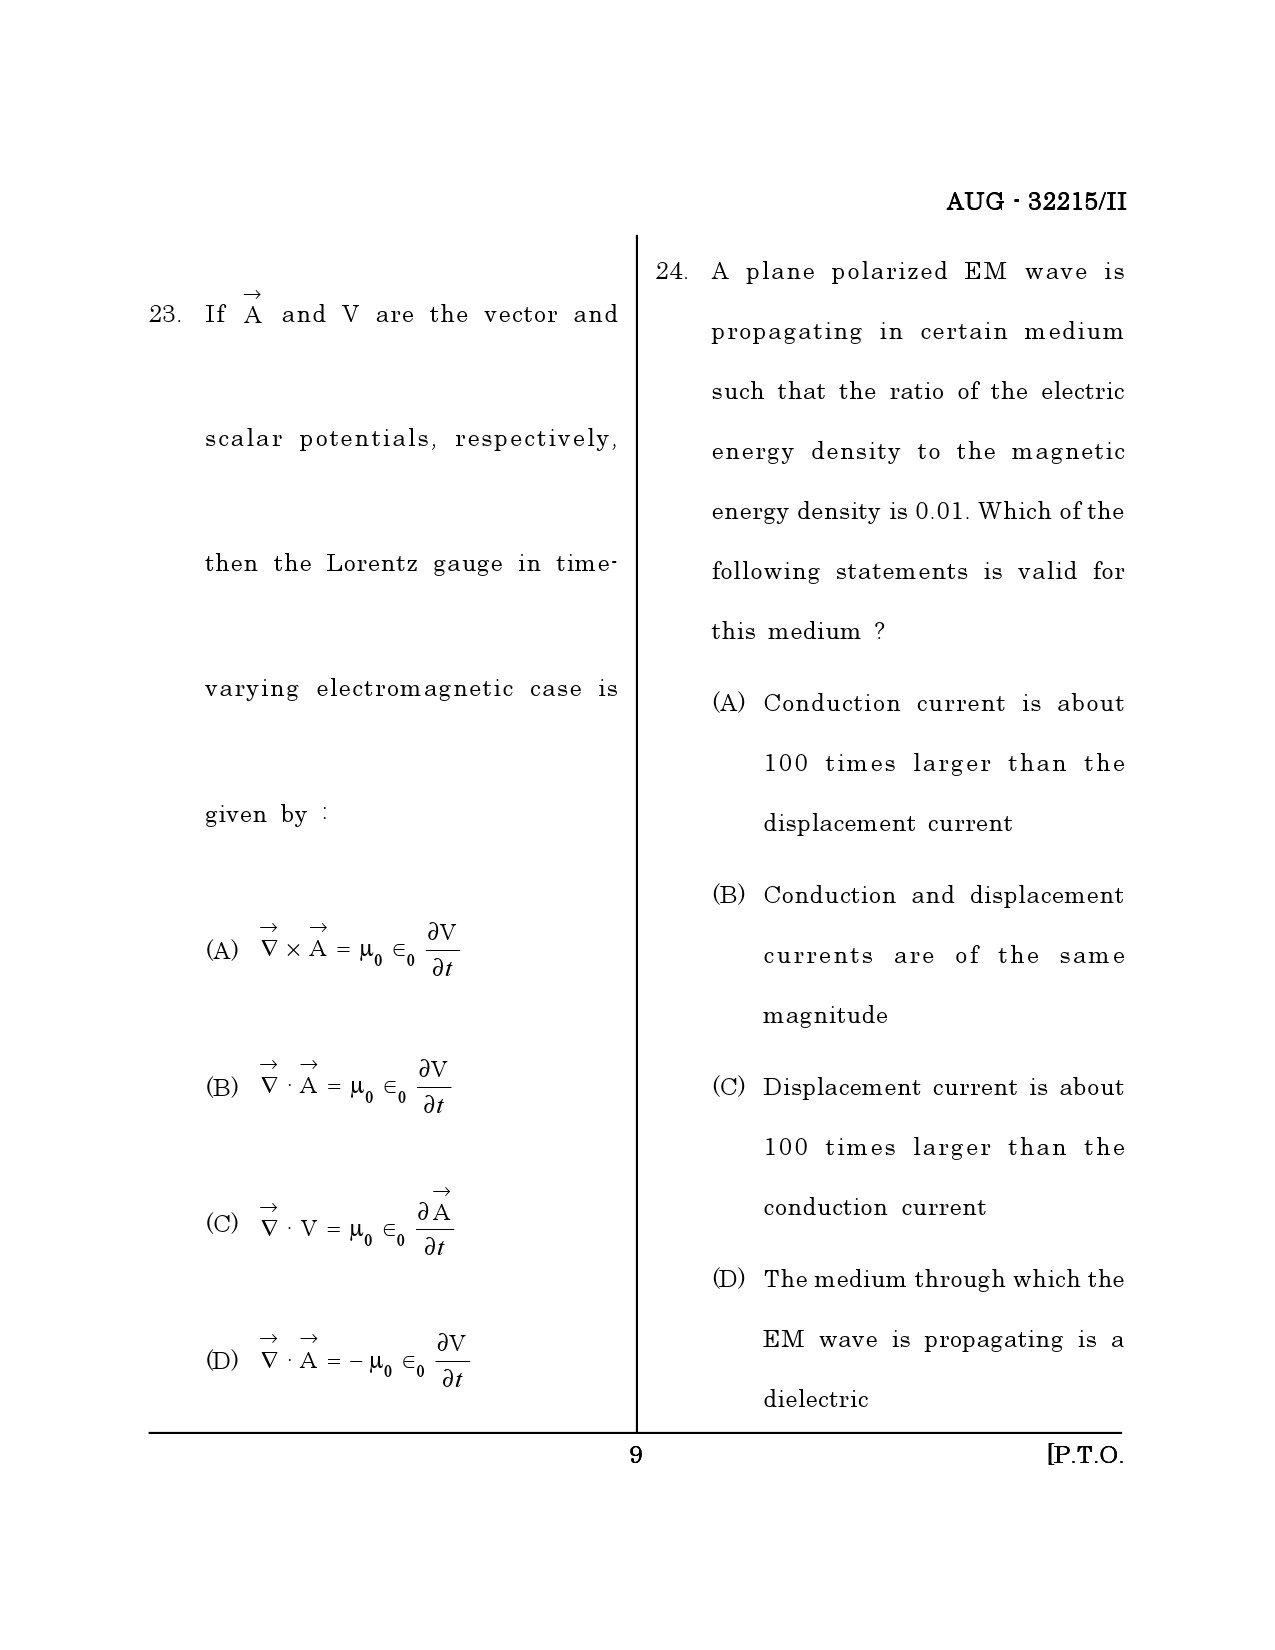 Maharashtra SET Physical Science Question Paper II August 2015 8